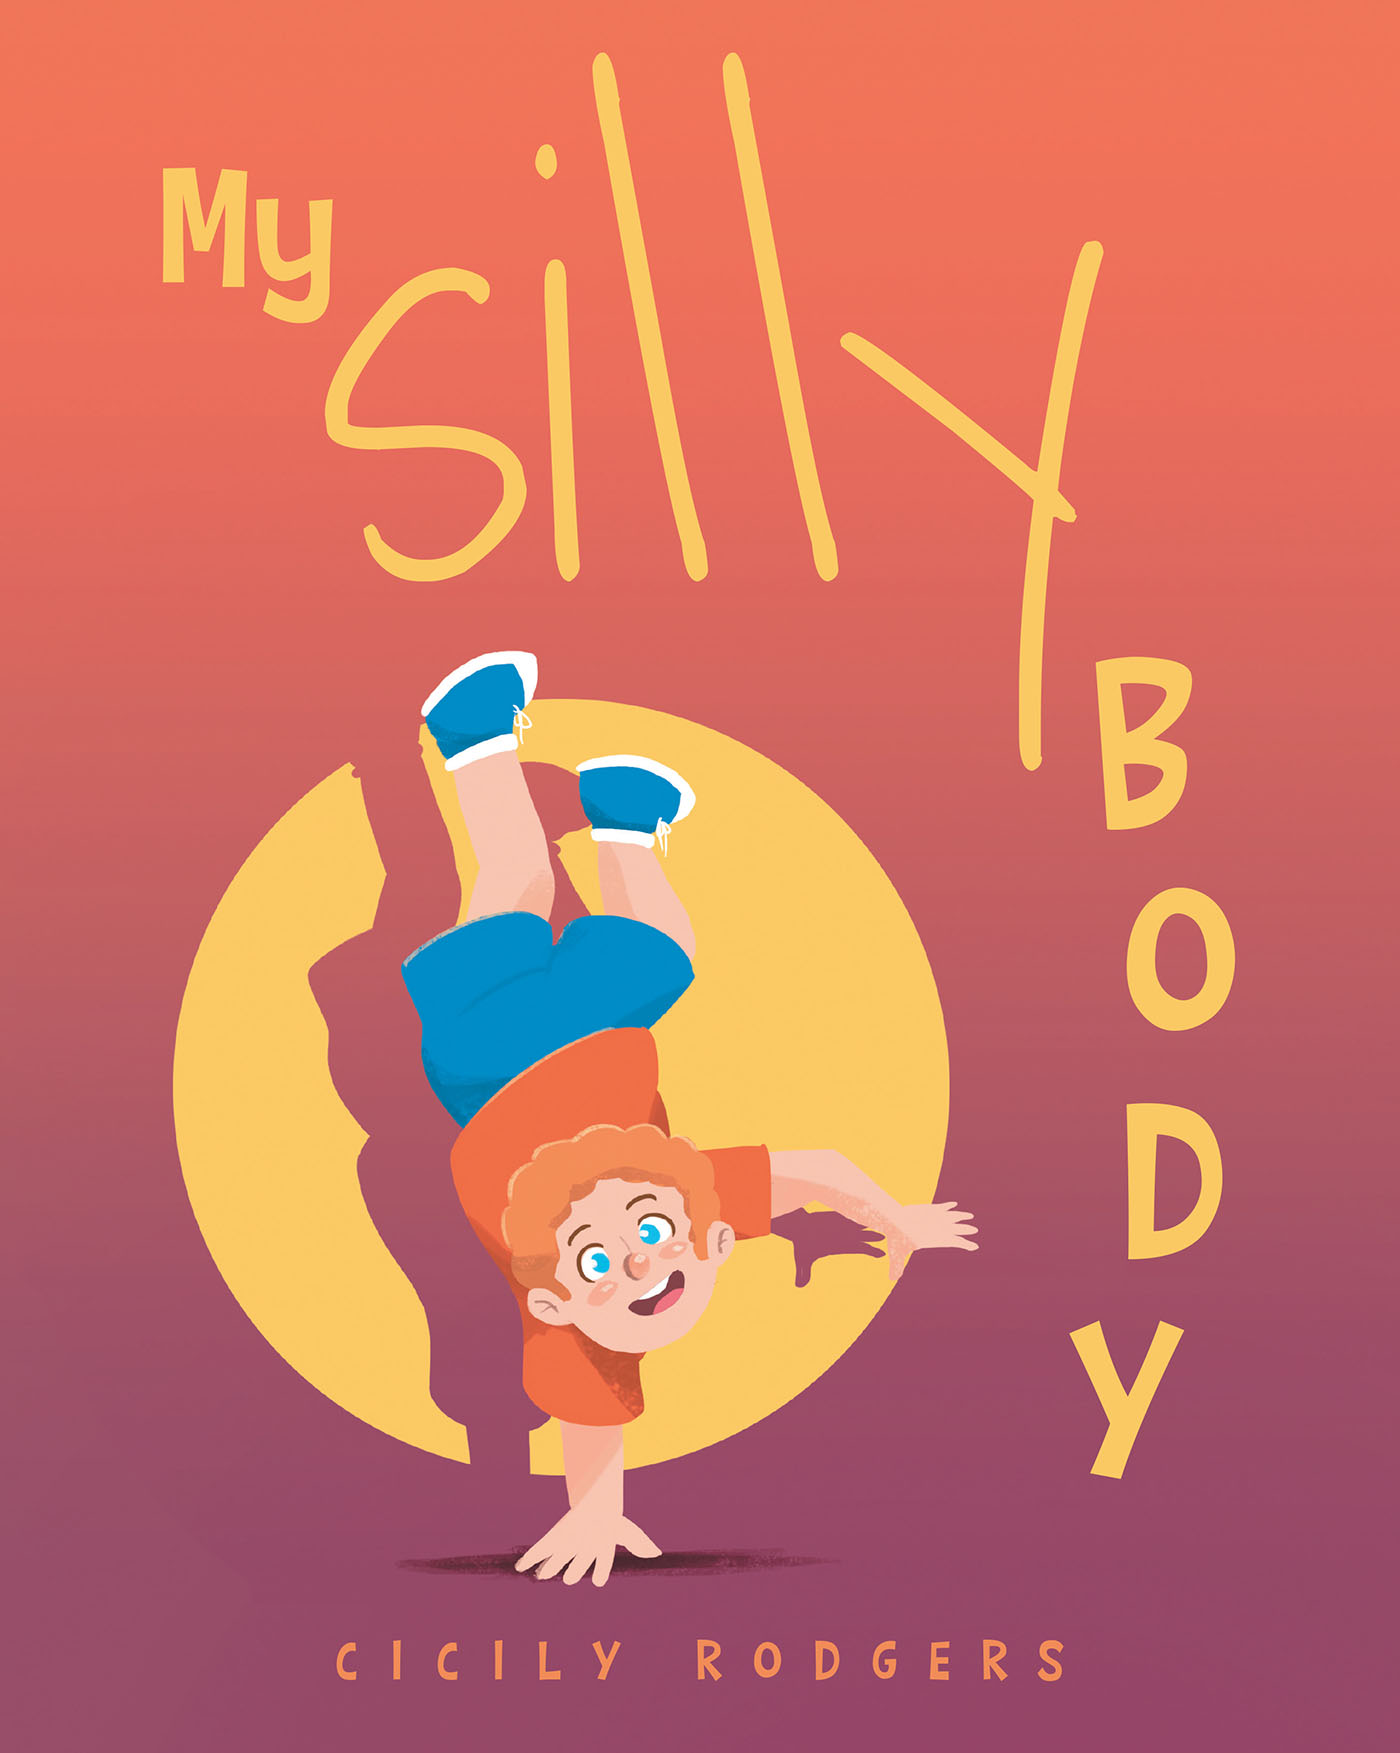 Author Cicily Rodgers’s New Book, "My Silly Body," is a Delightful Story That Explores All the Fun Ways a Person Can Move, Like Jumping and Waving One's Arms Like Wings